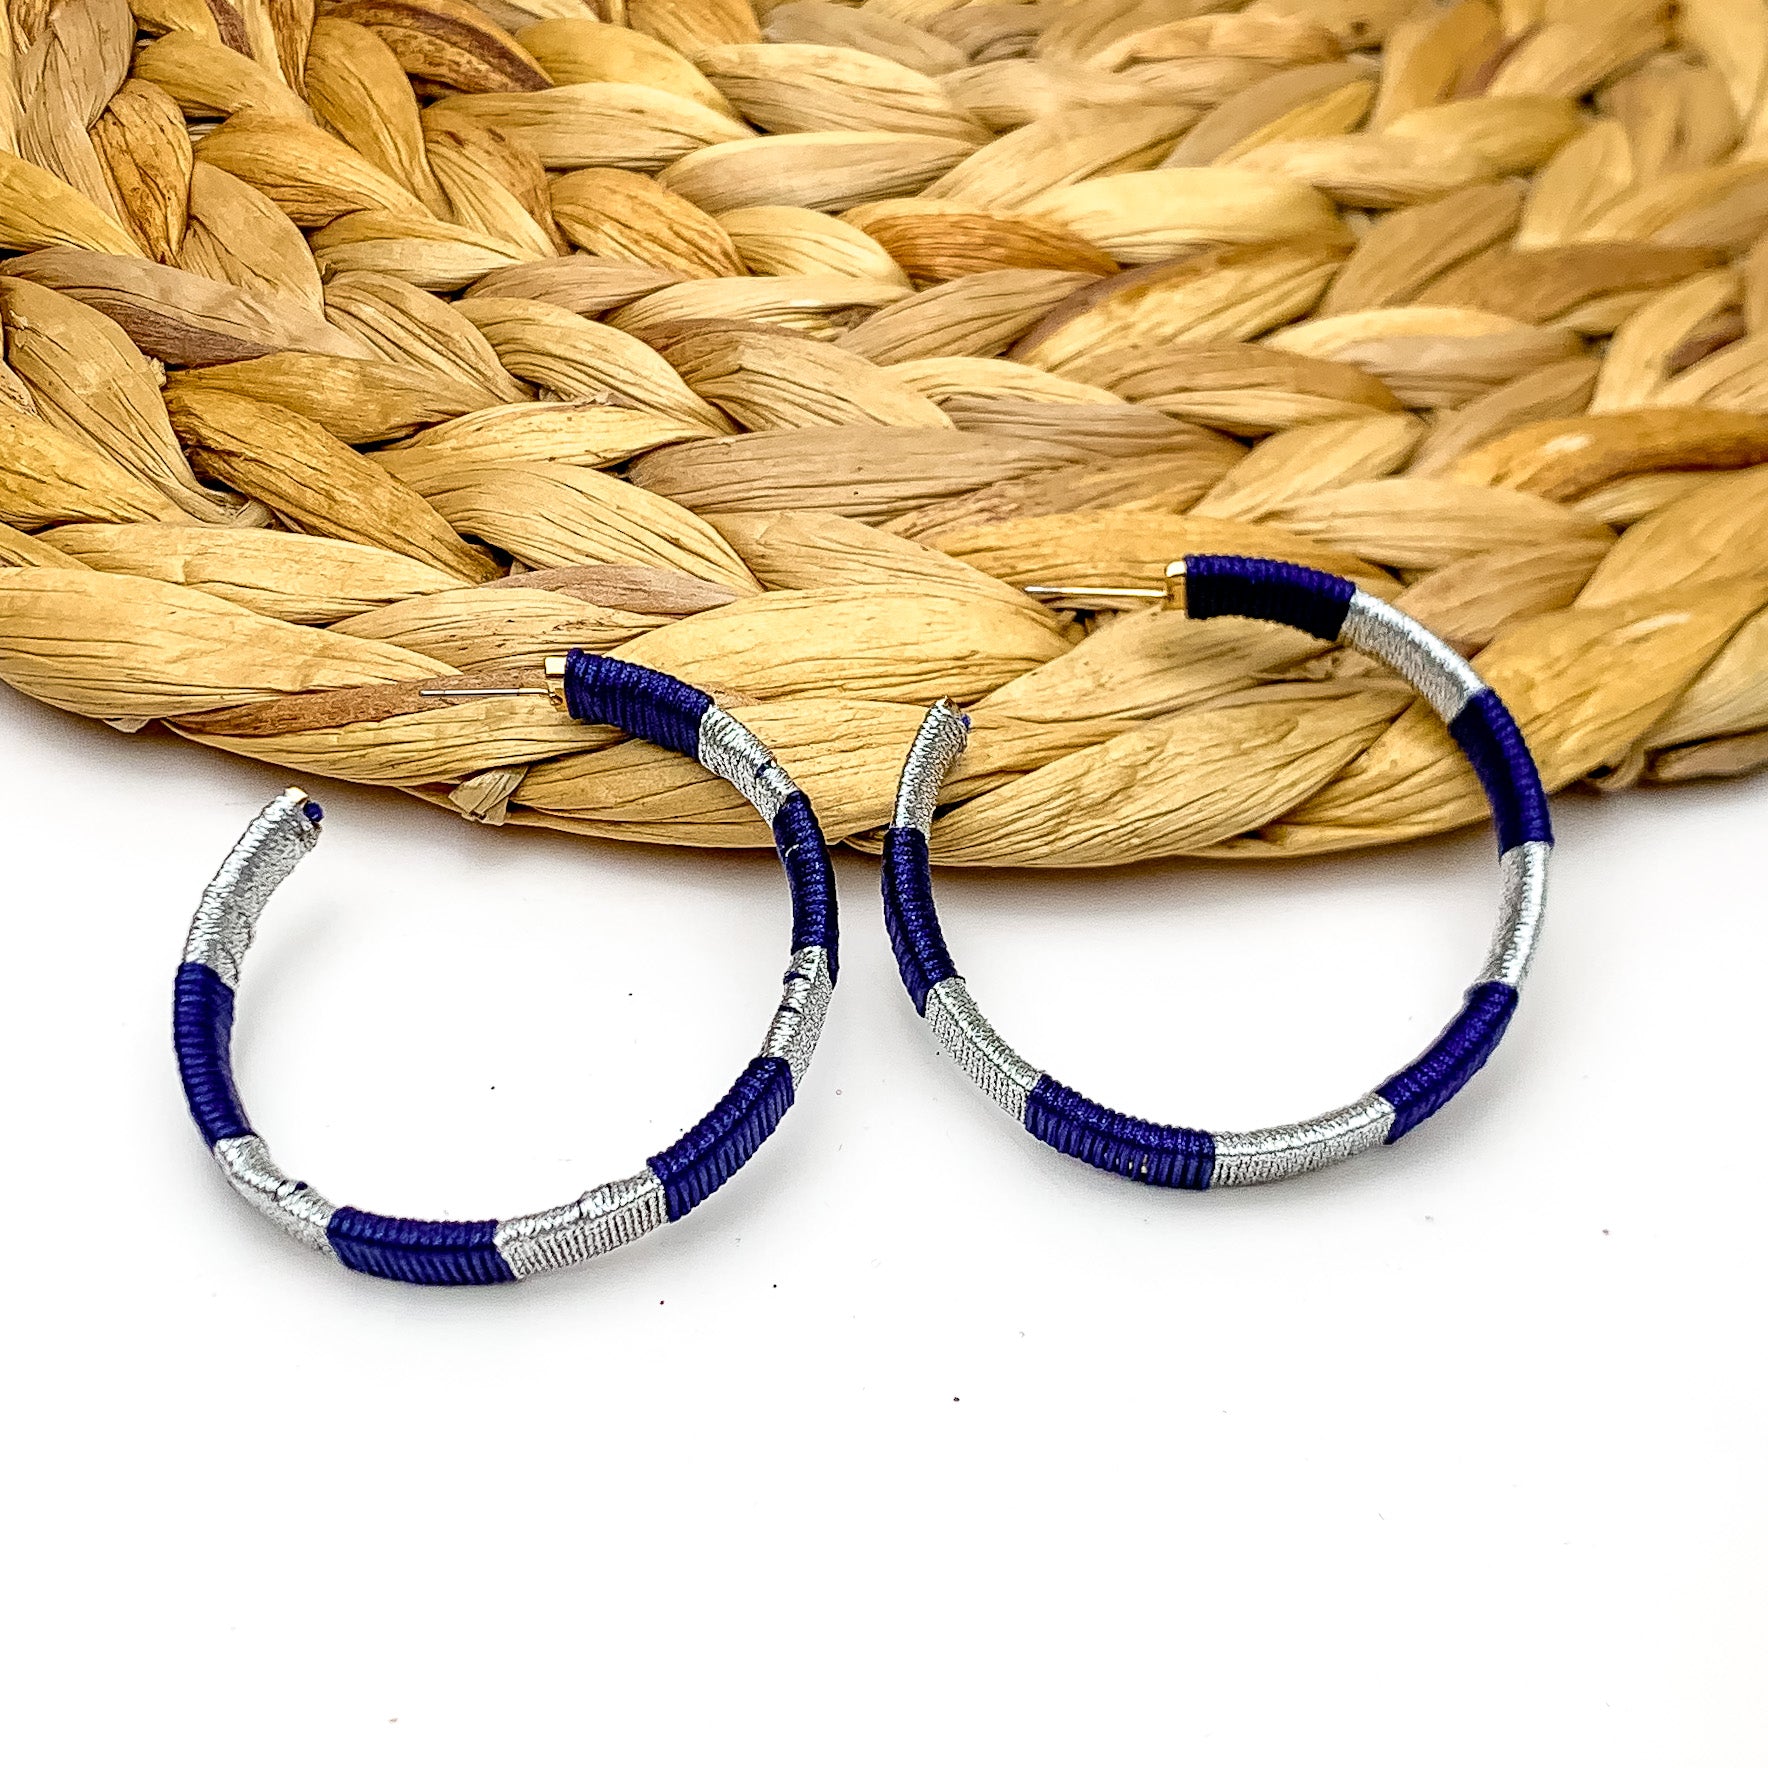 Game Day Glam Colored Hoop Earrings in Navy and Silver. The two colored hoops are laying against a woven decoration with a white background.